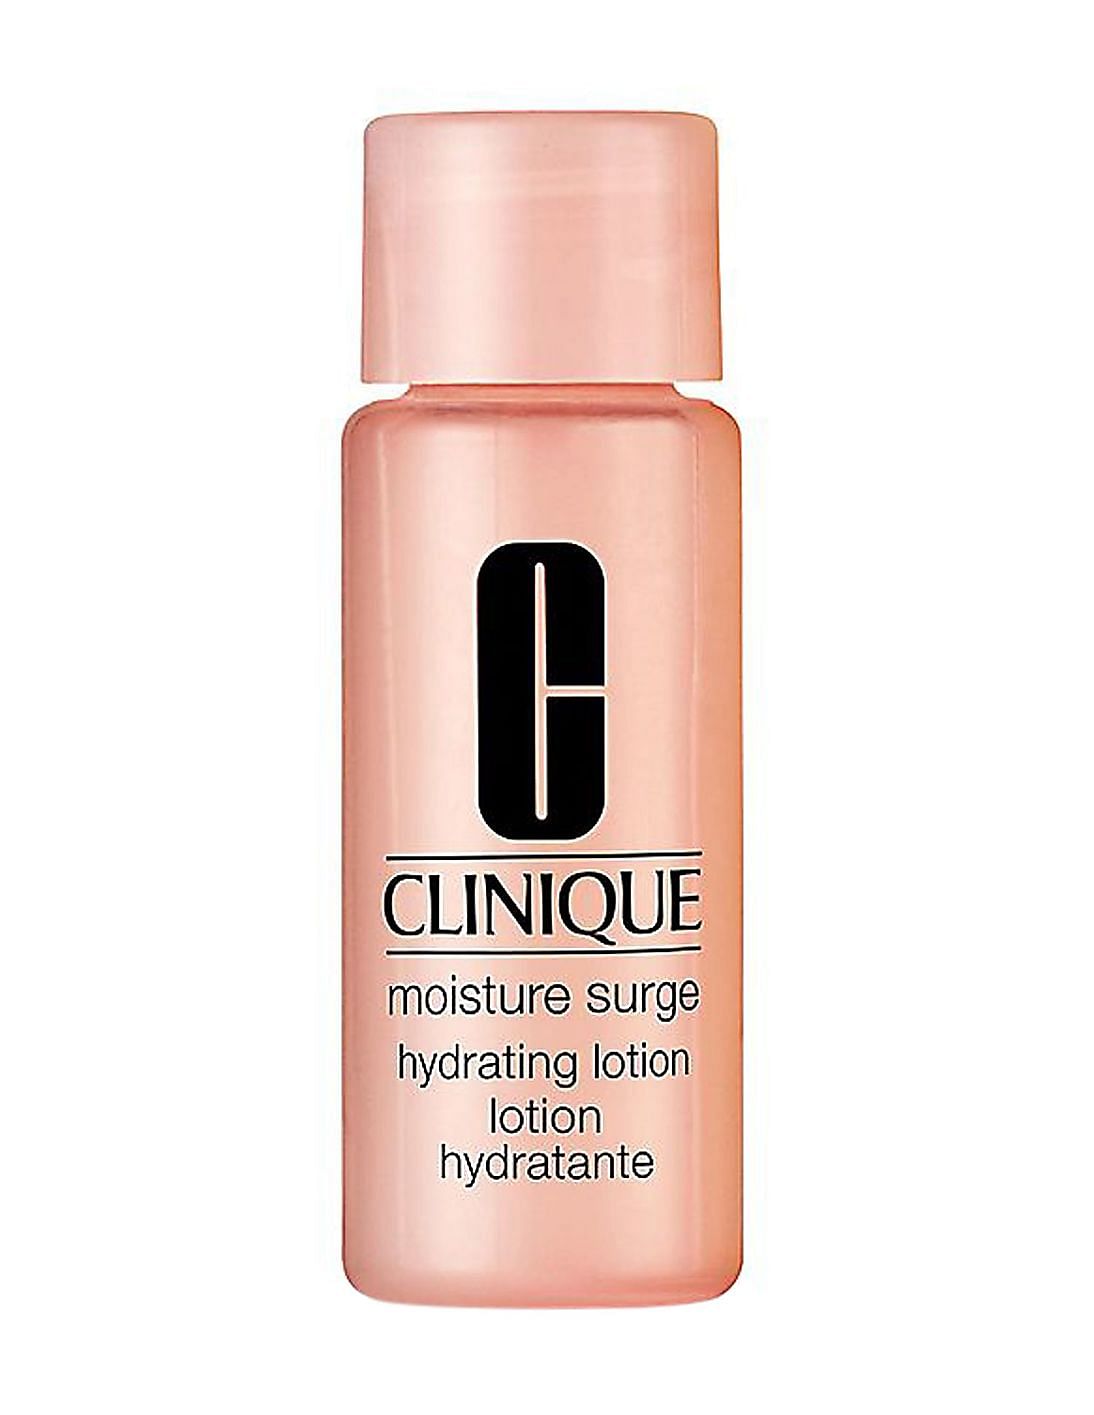 stivhed Assimilate Velsigne Buy CLINIQUE Moisture Surge Hydrating Lotion - NNNOW.com